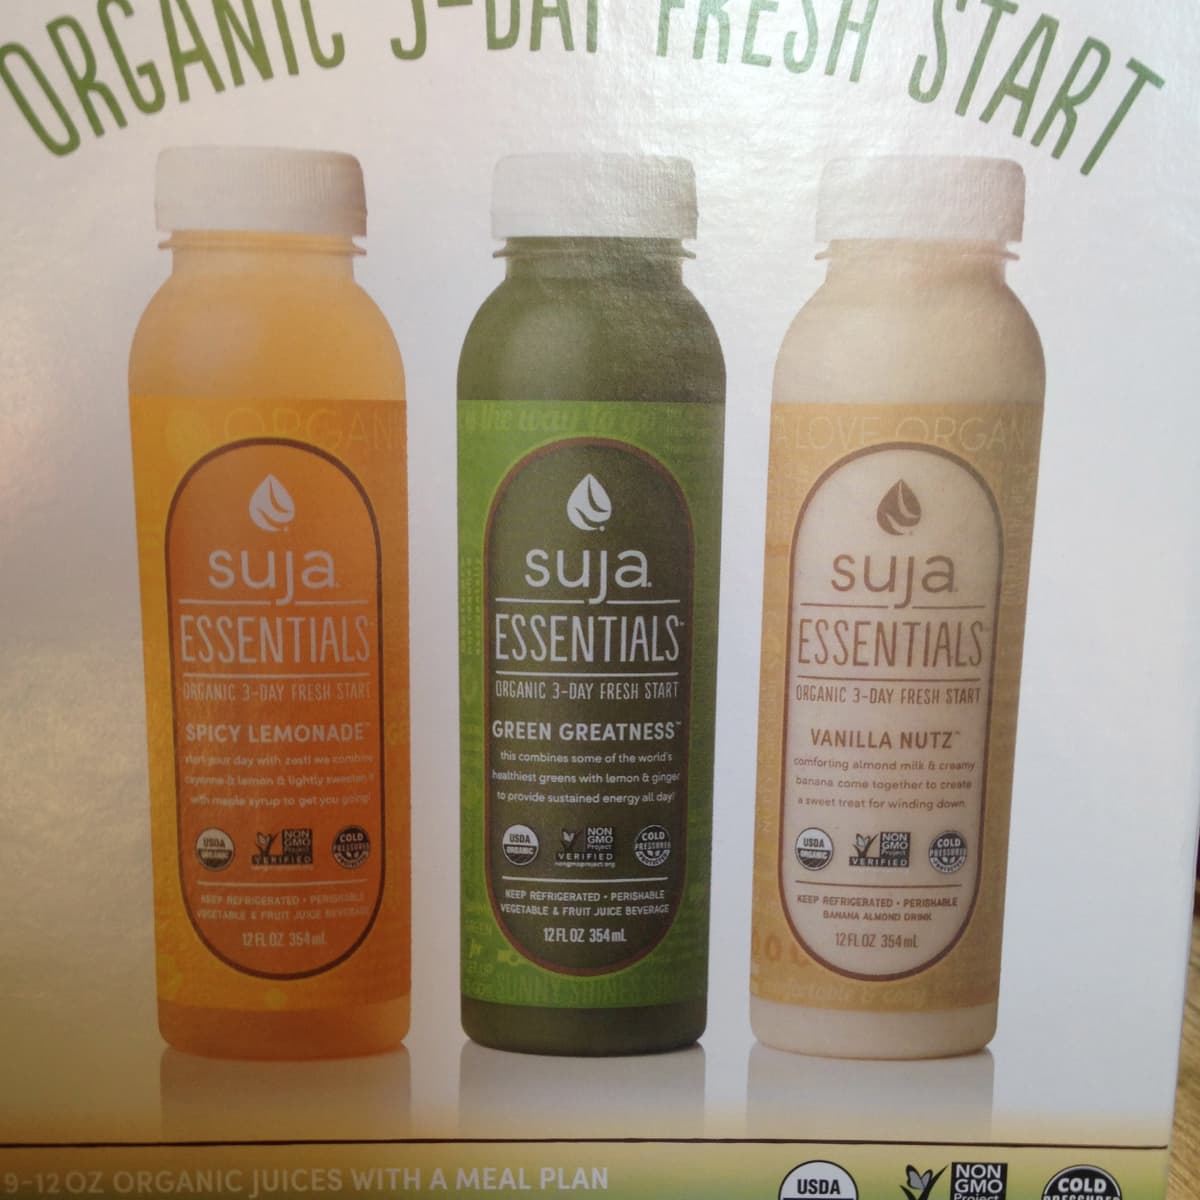 Suja Juice Cleanse Sold At Costco: A Review - Caloriebee